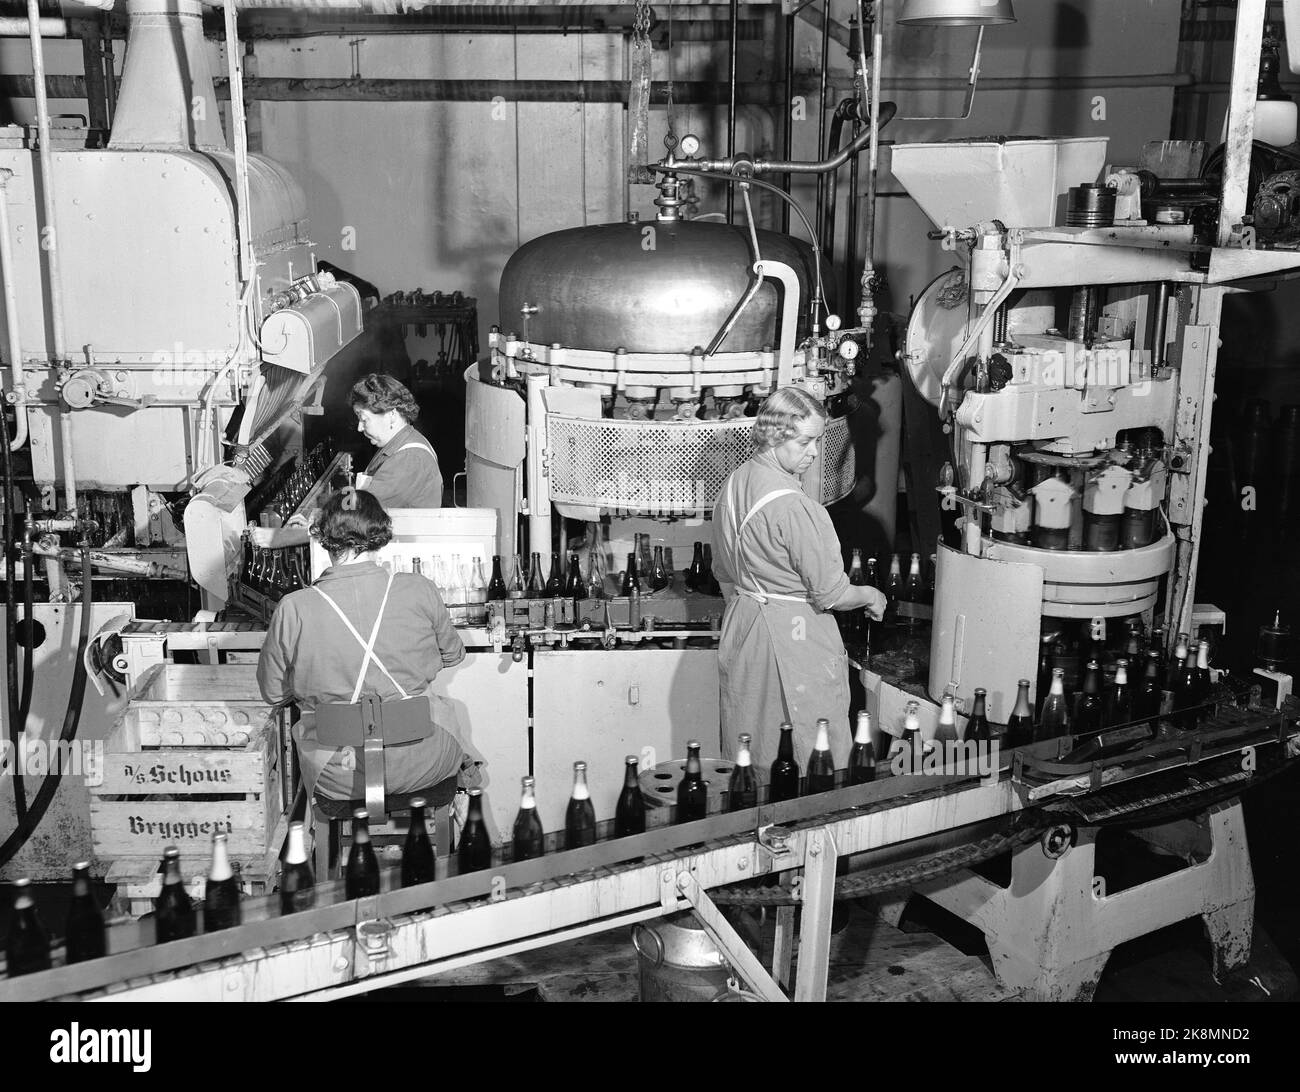 Oslo 1951. Breweries in Oslo in 1951. Here from one of the work processes where corks are attached to the beer bottles. The machine is operated by ladies. Photo: Sverre A. Børretzen / Current / NTB Stock Photo